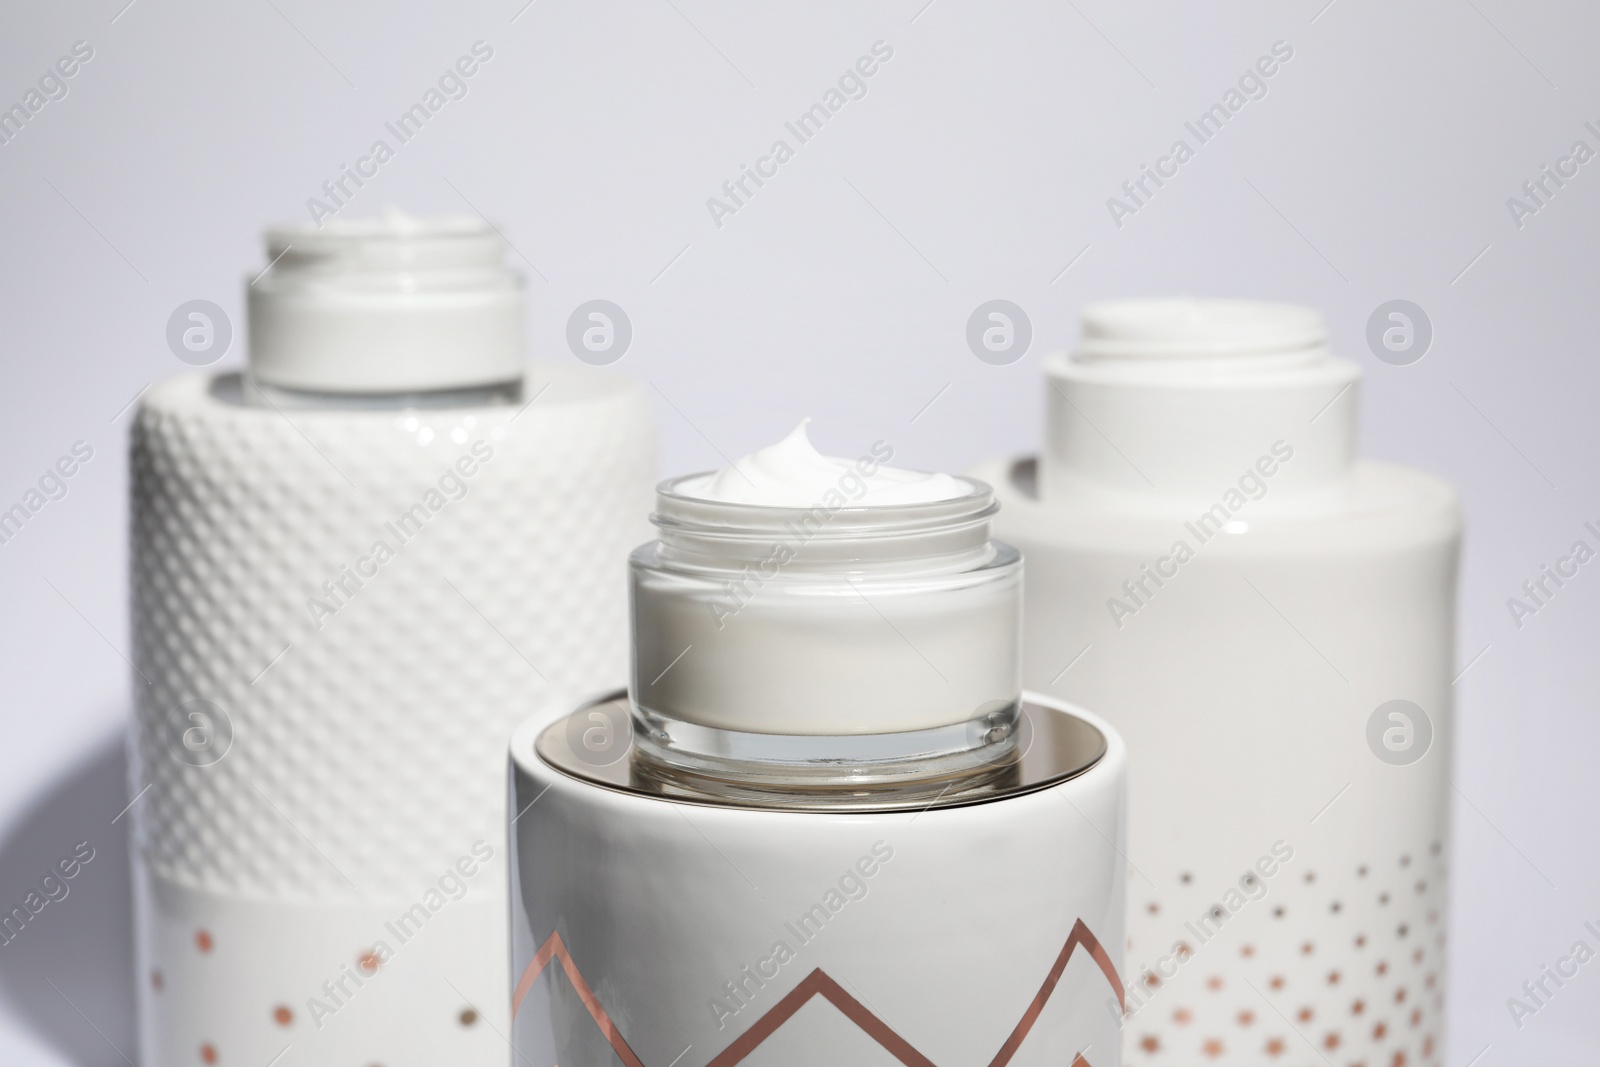 Photo of Open jars of cream on display against light background